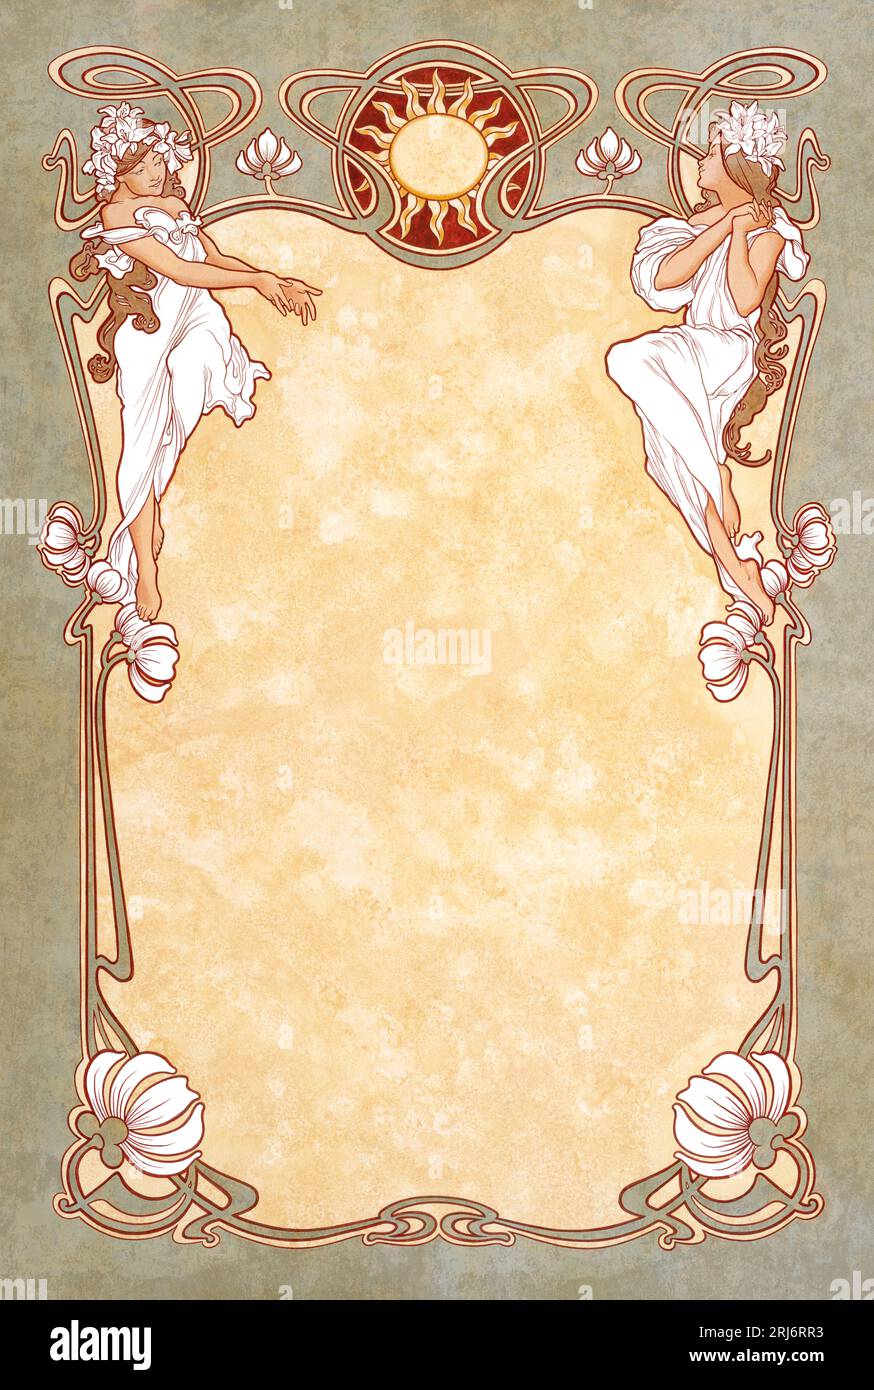 Illustrated, Imaginary, Decorative, Retro Poster in Art Nouveau Style with Blank Copy Space. Stock Photo